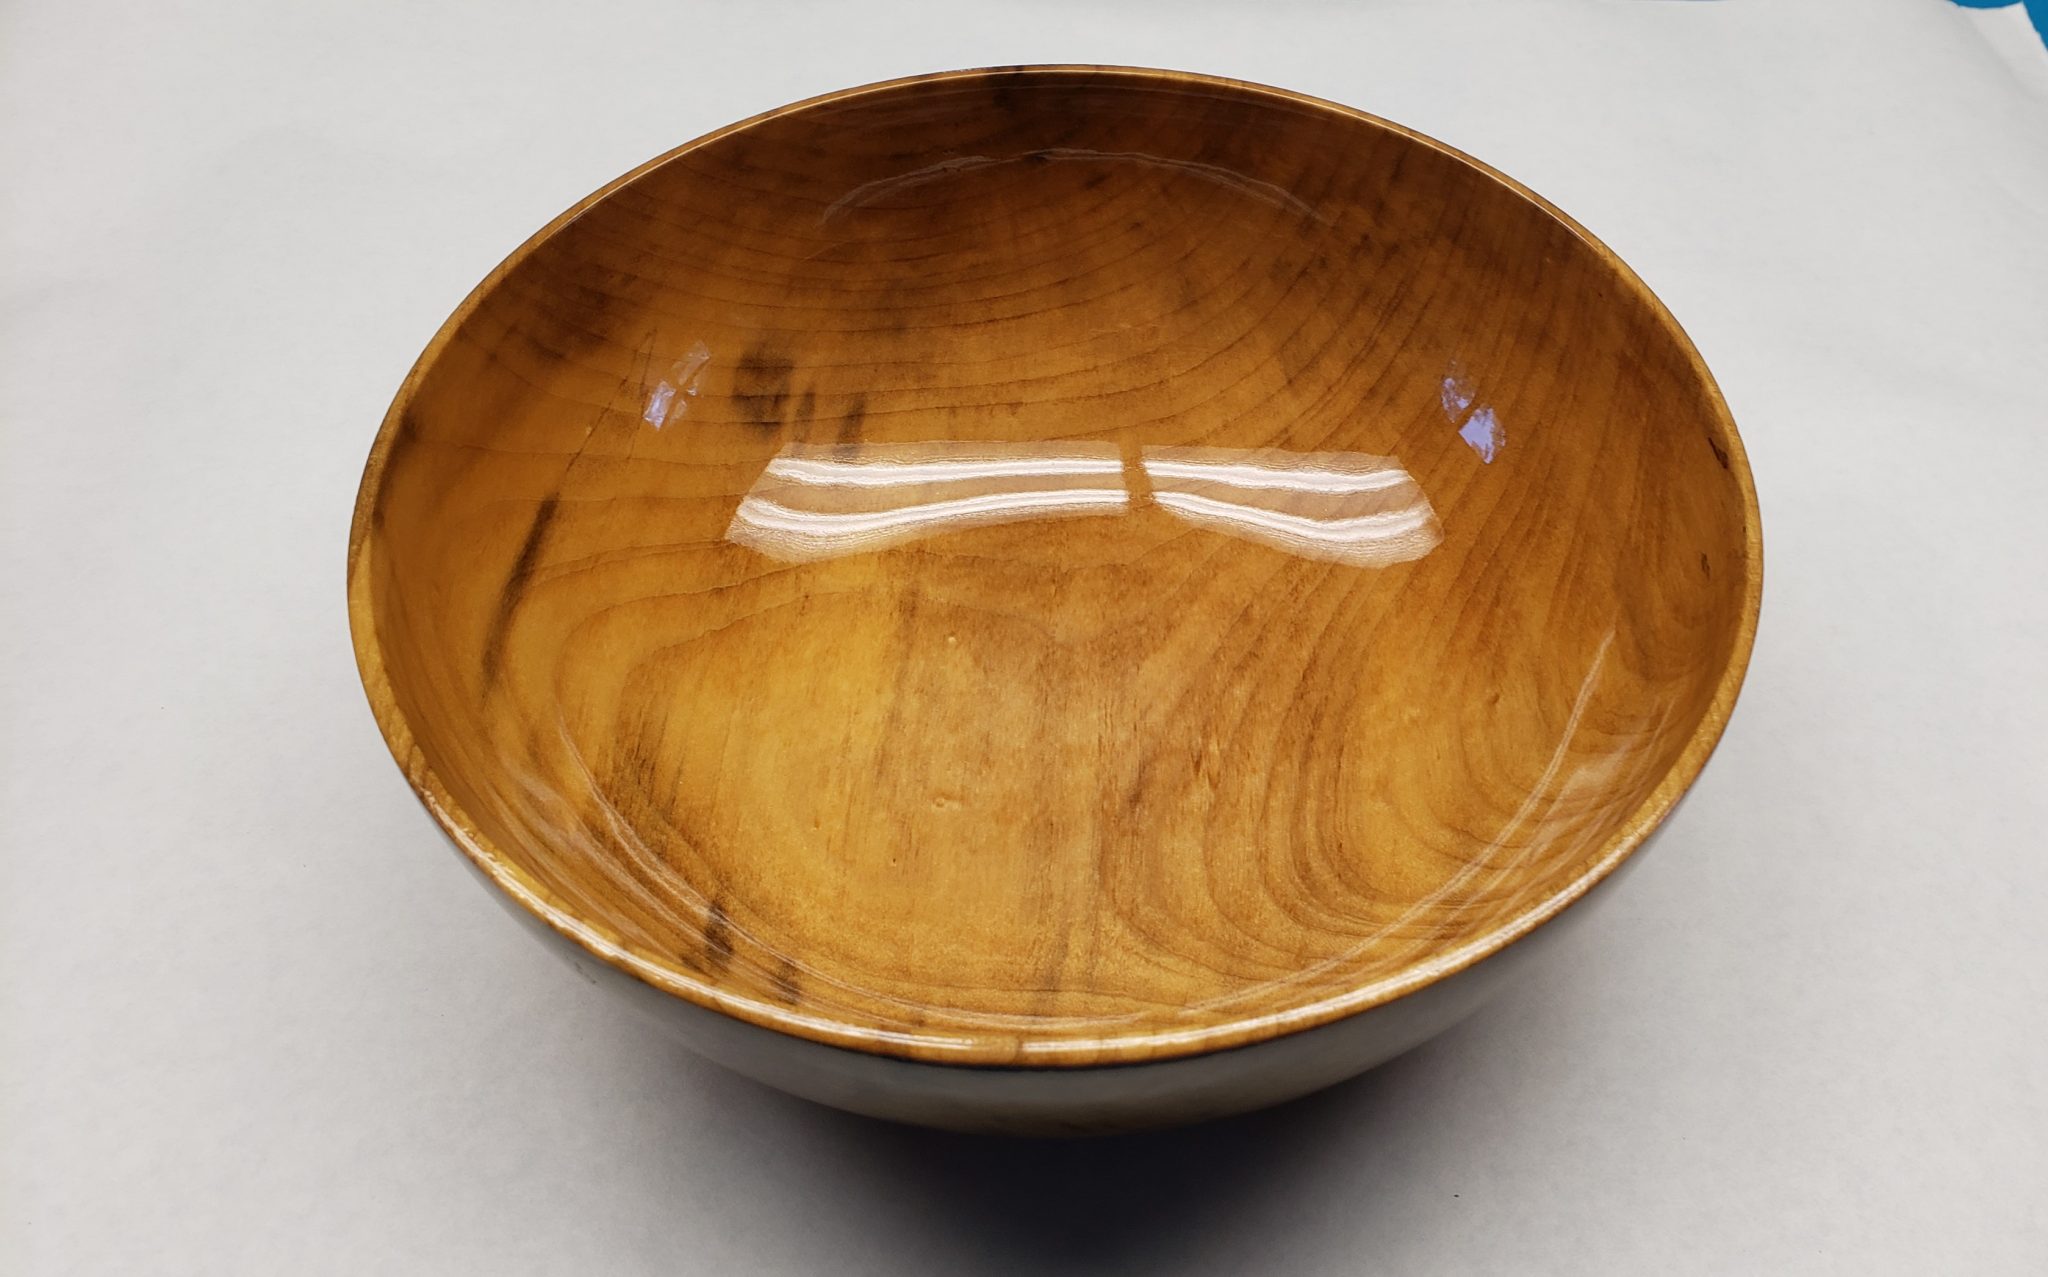 A few bowls with various woods and finishes